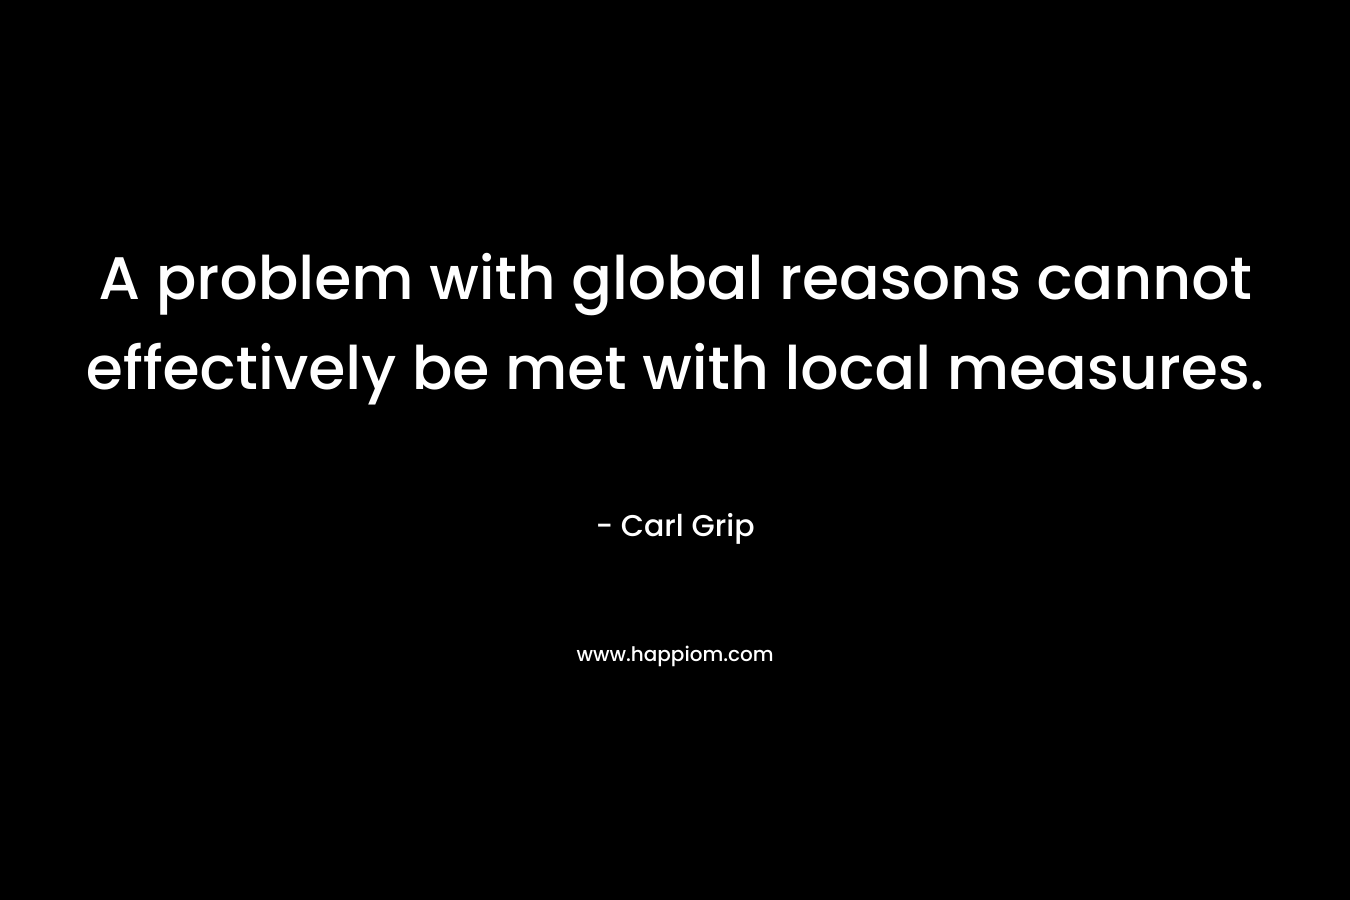 A problem with global reasons cannot effectively be met with local measures. – Carl Grip